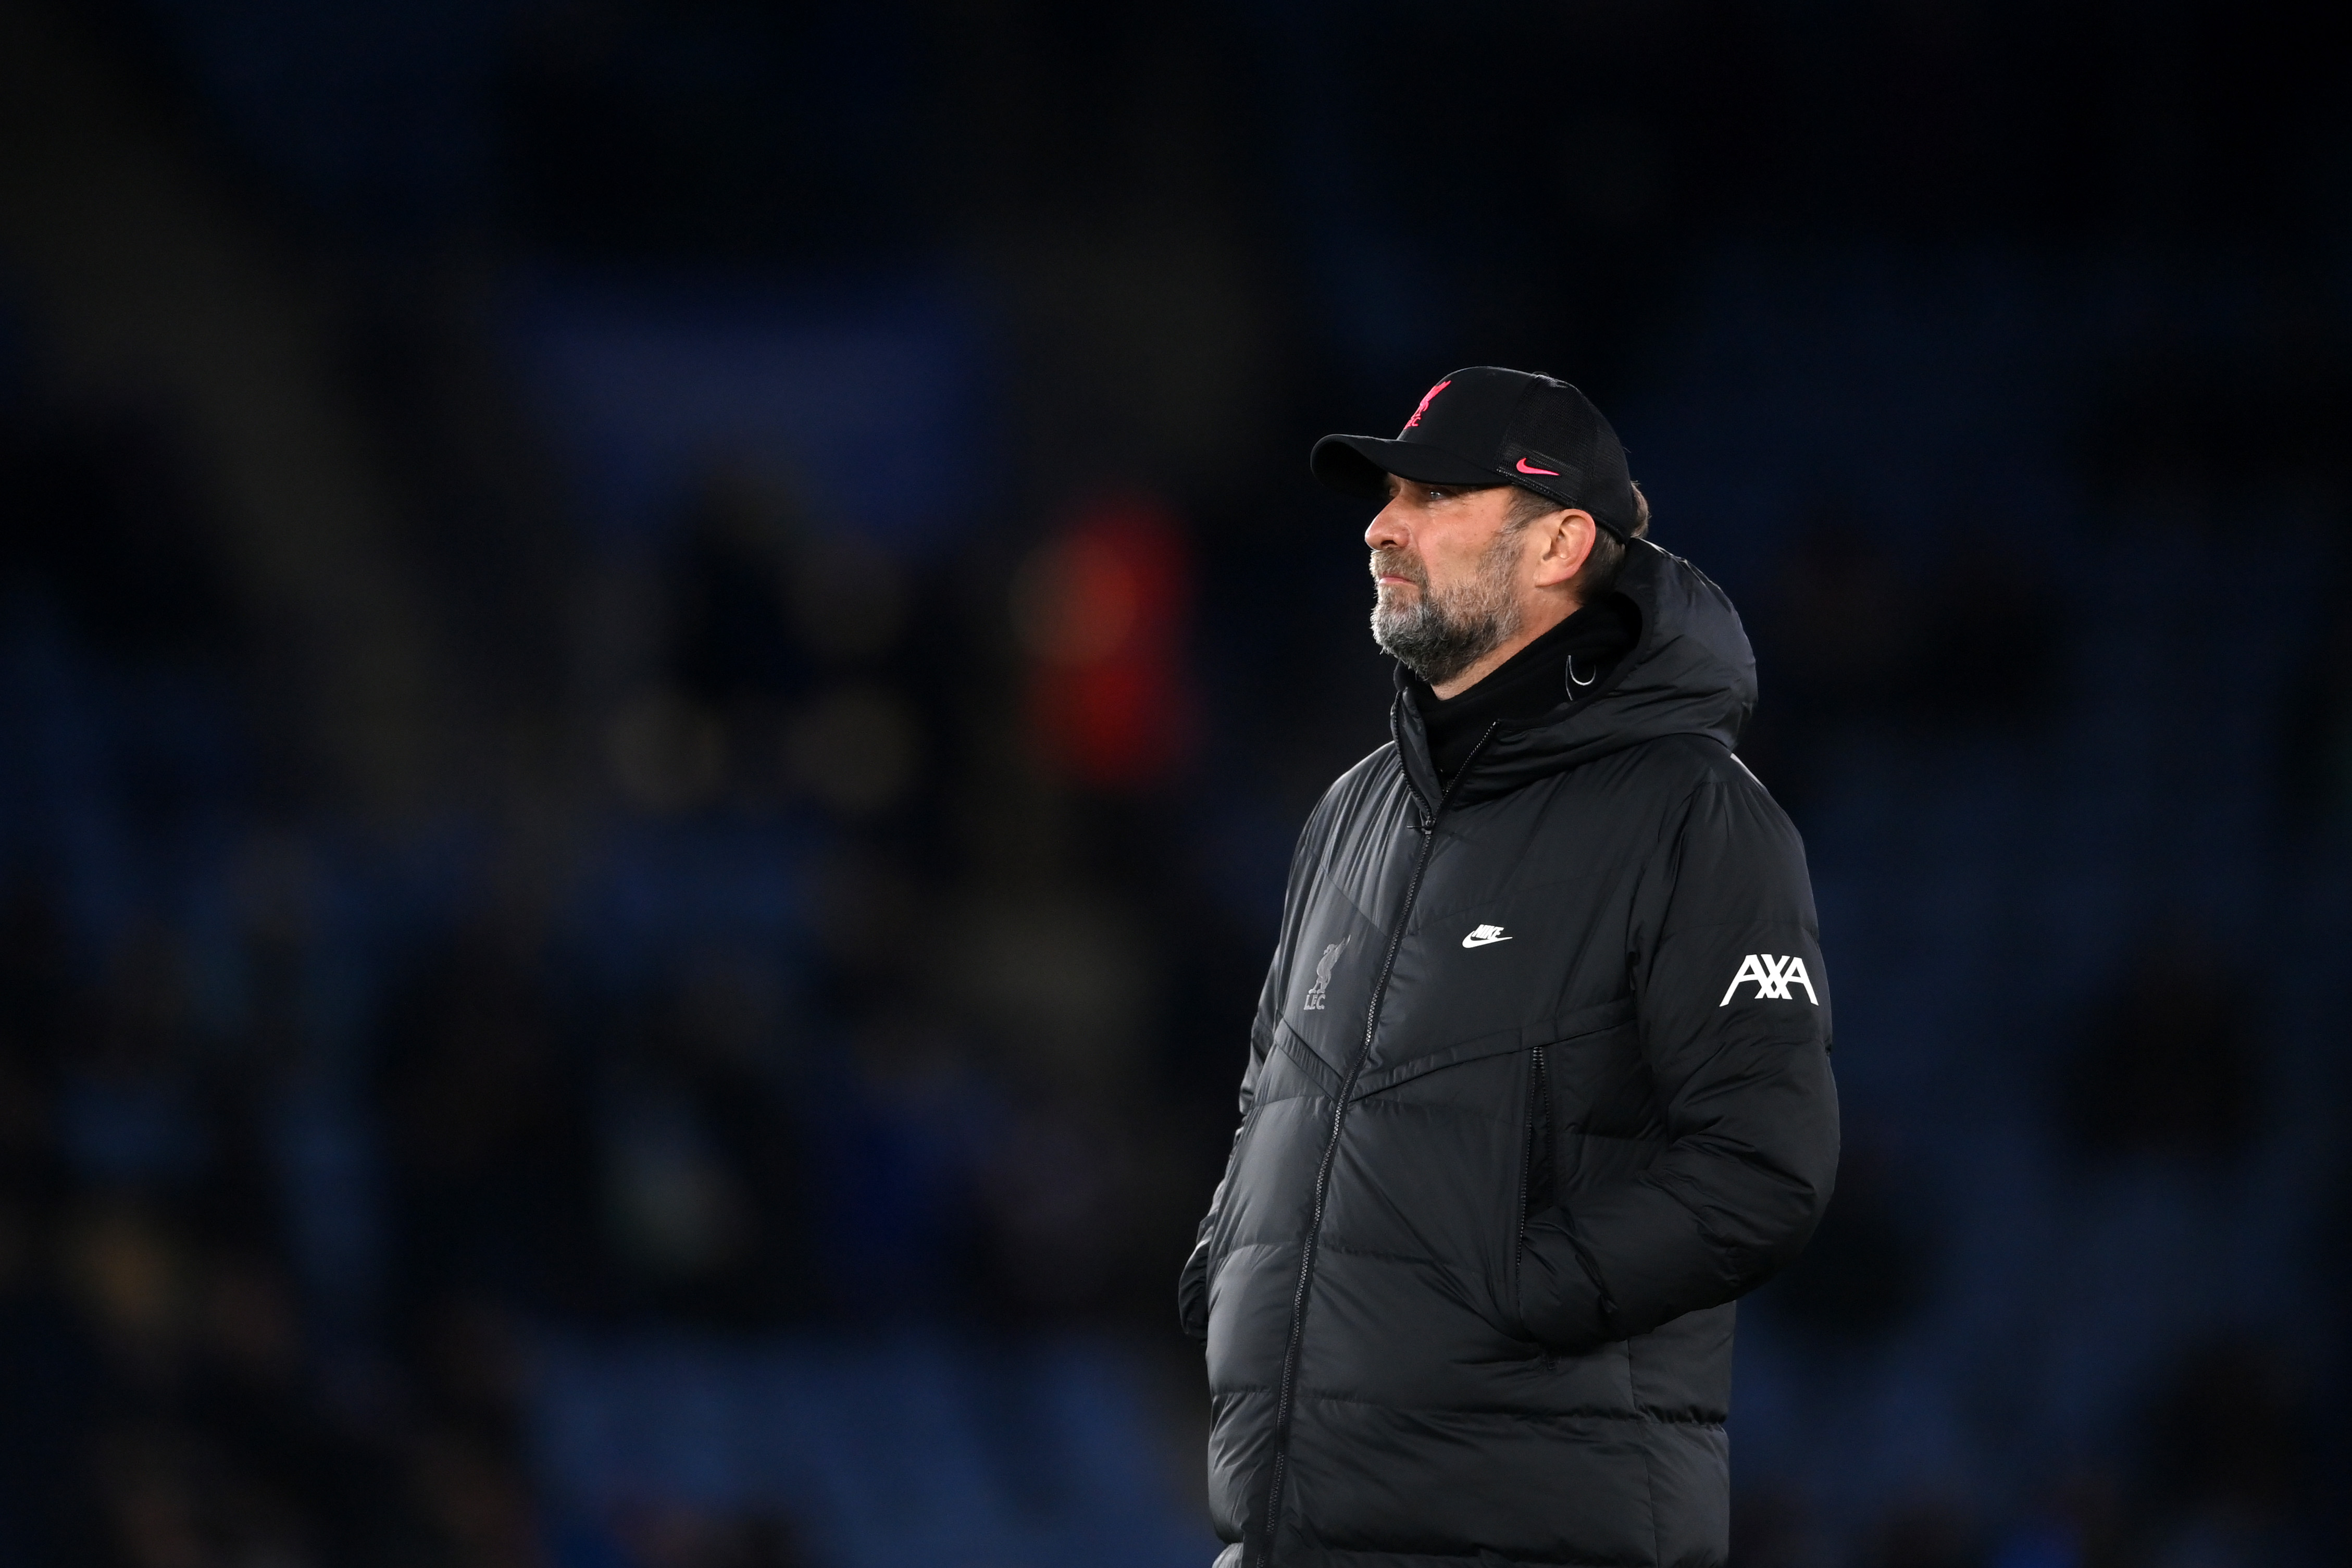 ‘The policy here is clear’ – Jurgen Klopp provides honest insight into Liverpool’s transfer strategy